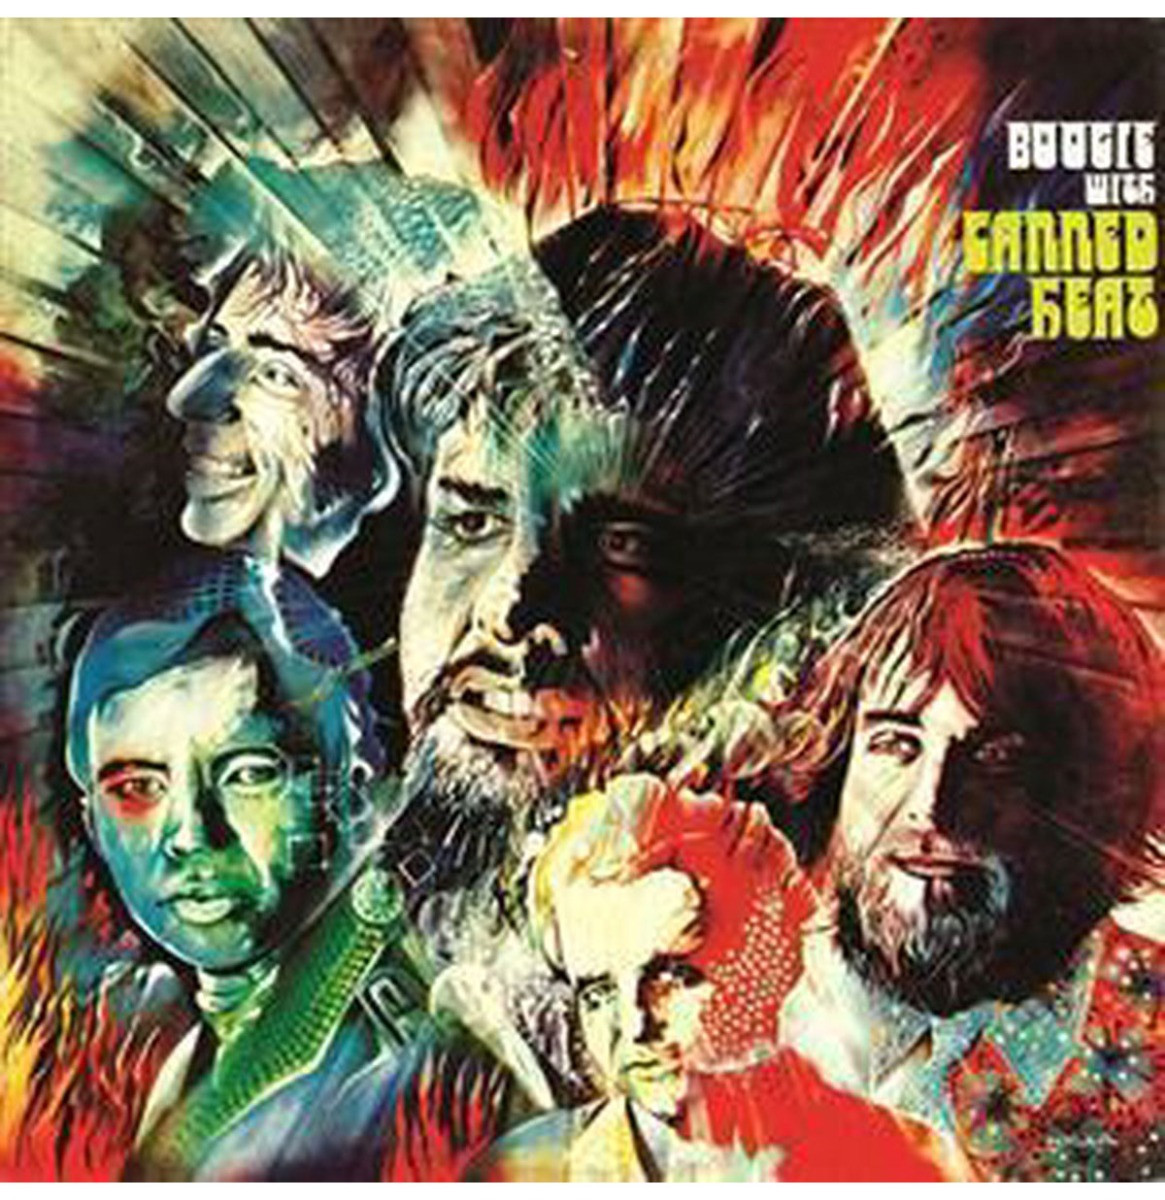 Canned Heat - Boogie With Canned Heat LP